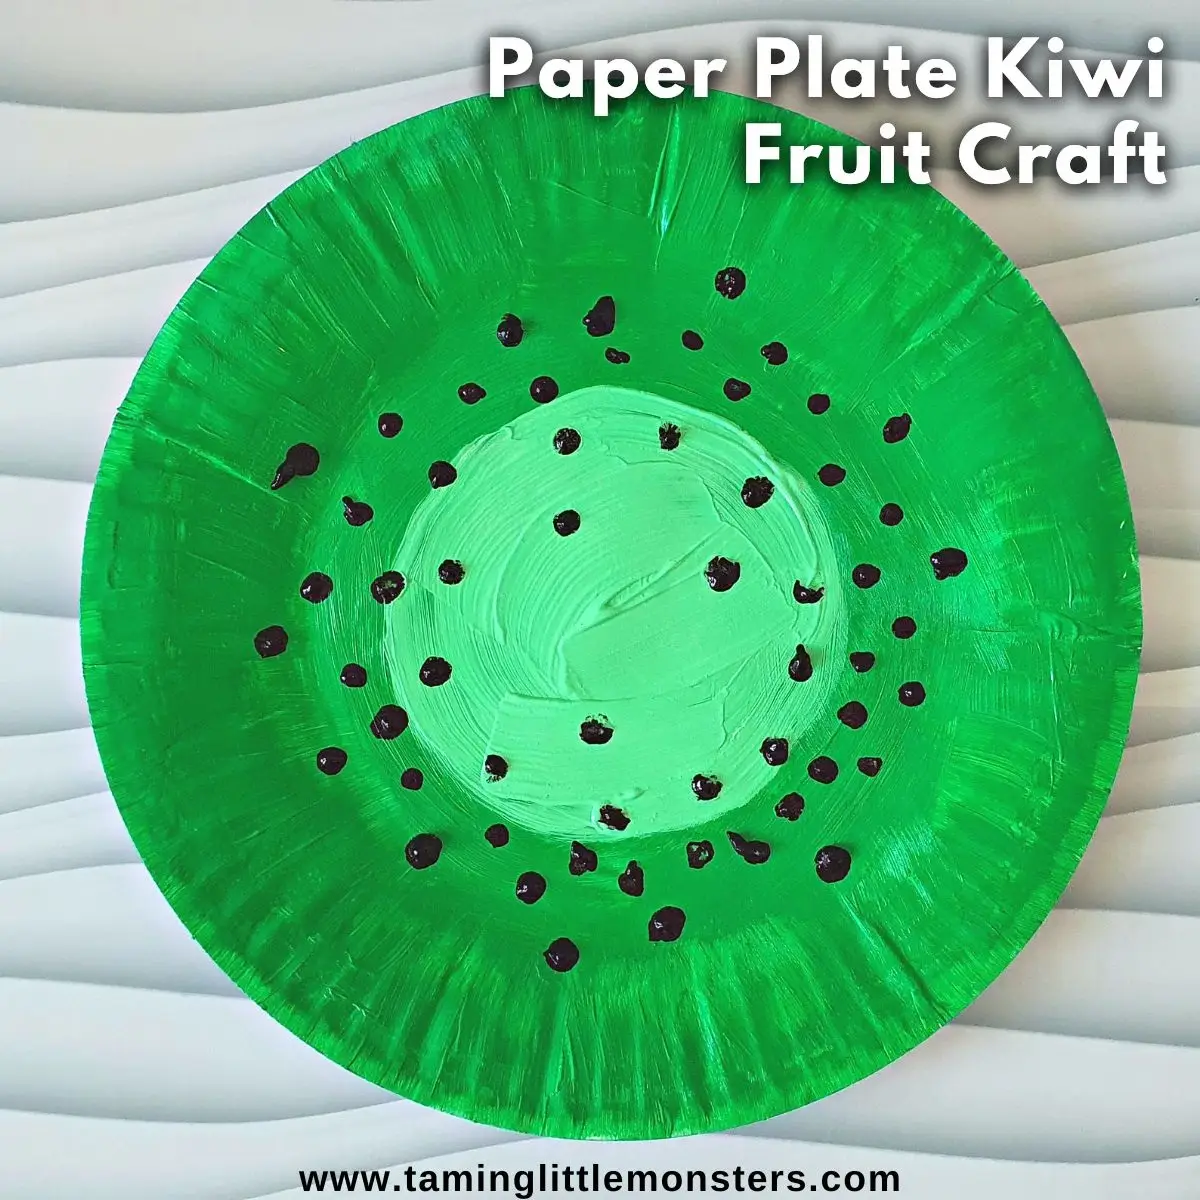 Easy Paper Plate Fish Craft for Toddlers and Preschoolers - Taming